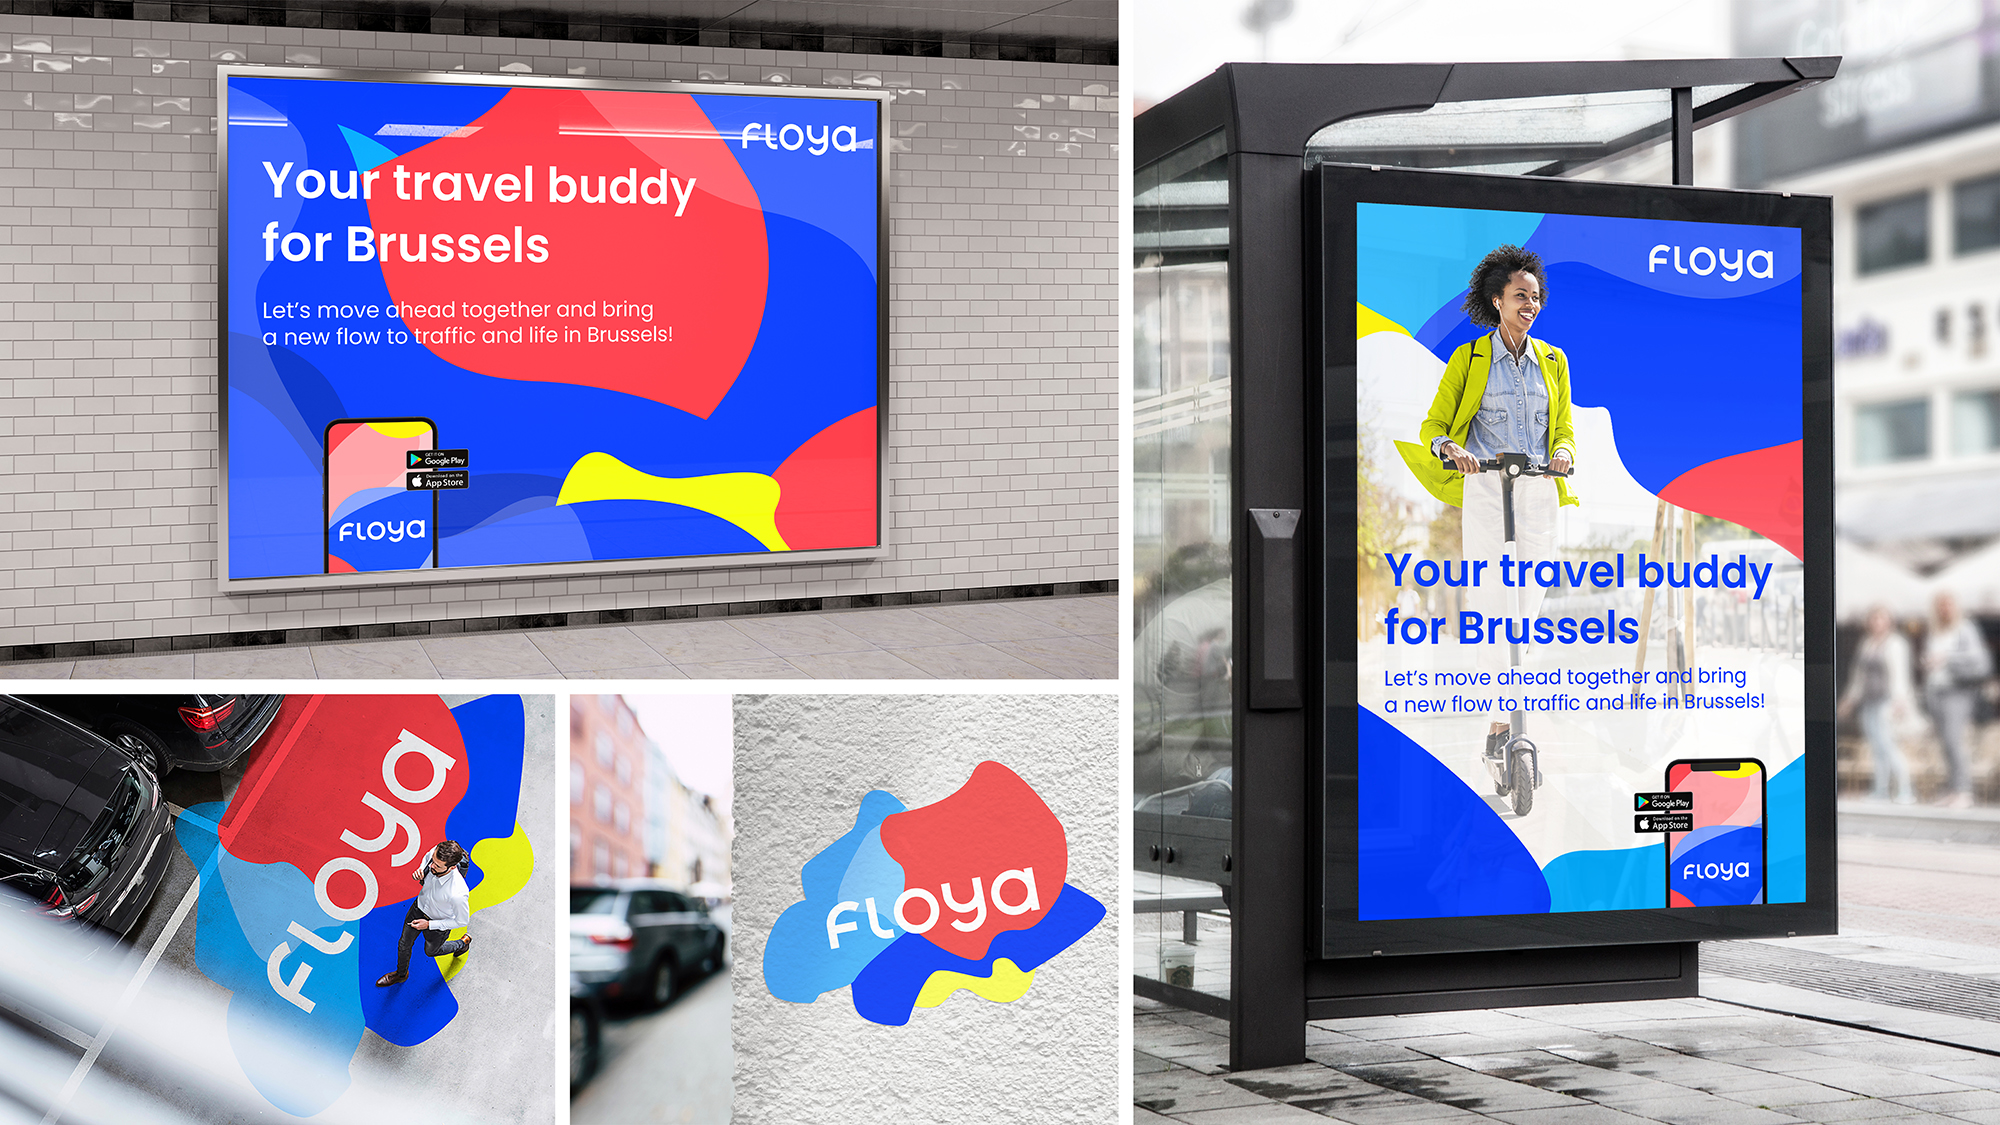 Floya – Your travel buddy for Brussels